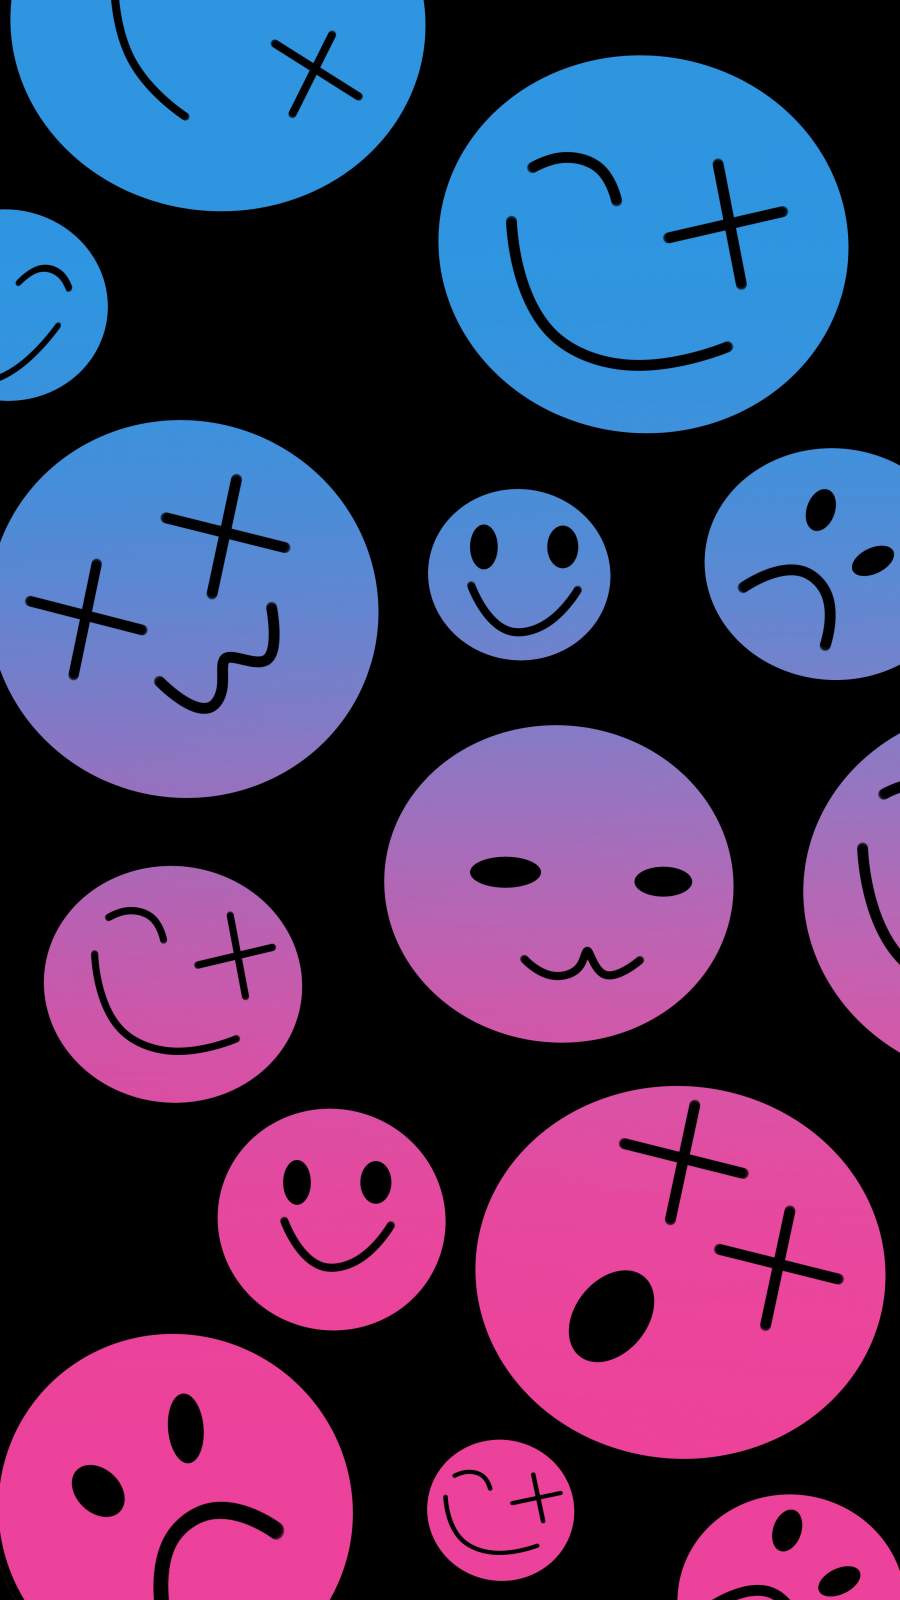 Emotion Smiley FacesWallpaper